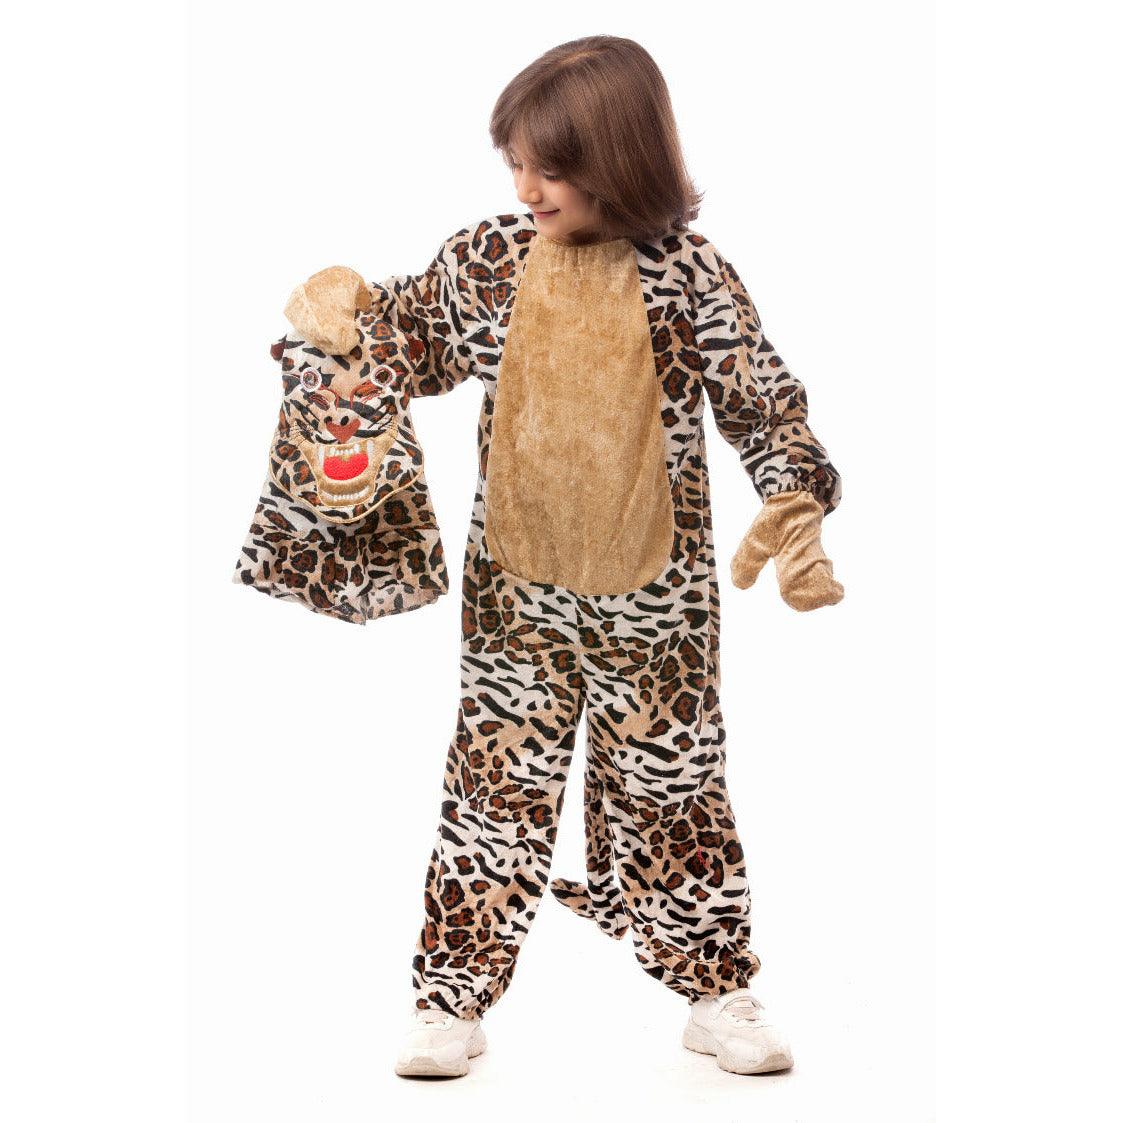 Tiger Costume - Ourkids - M&A